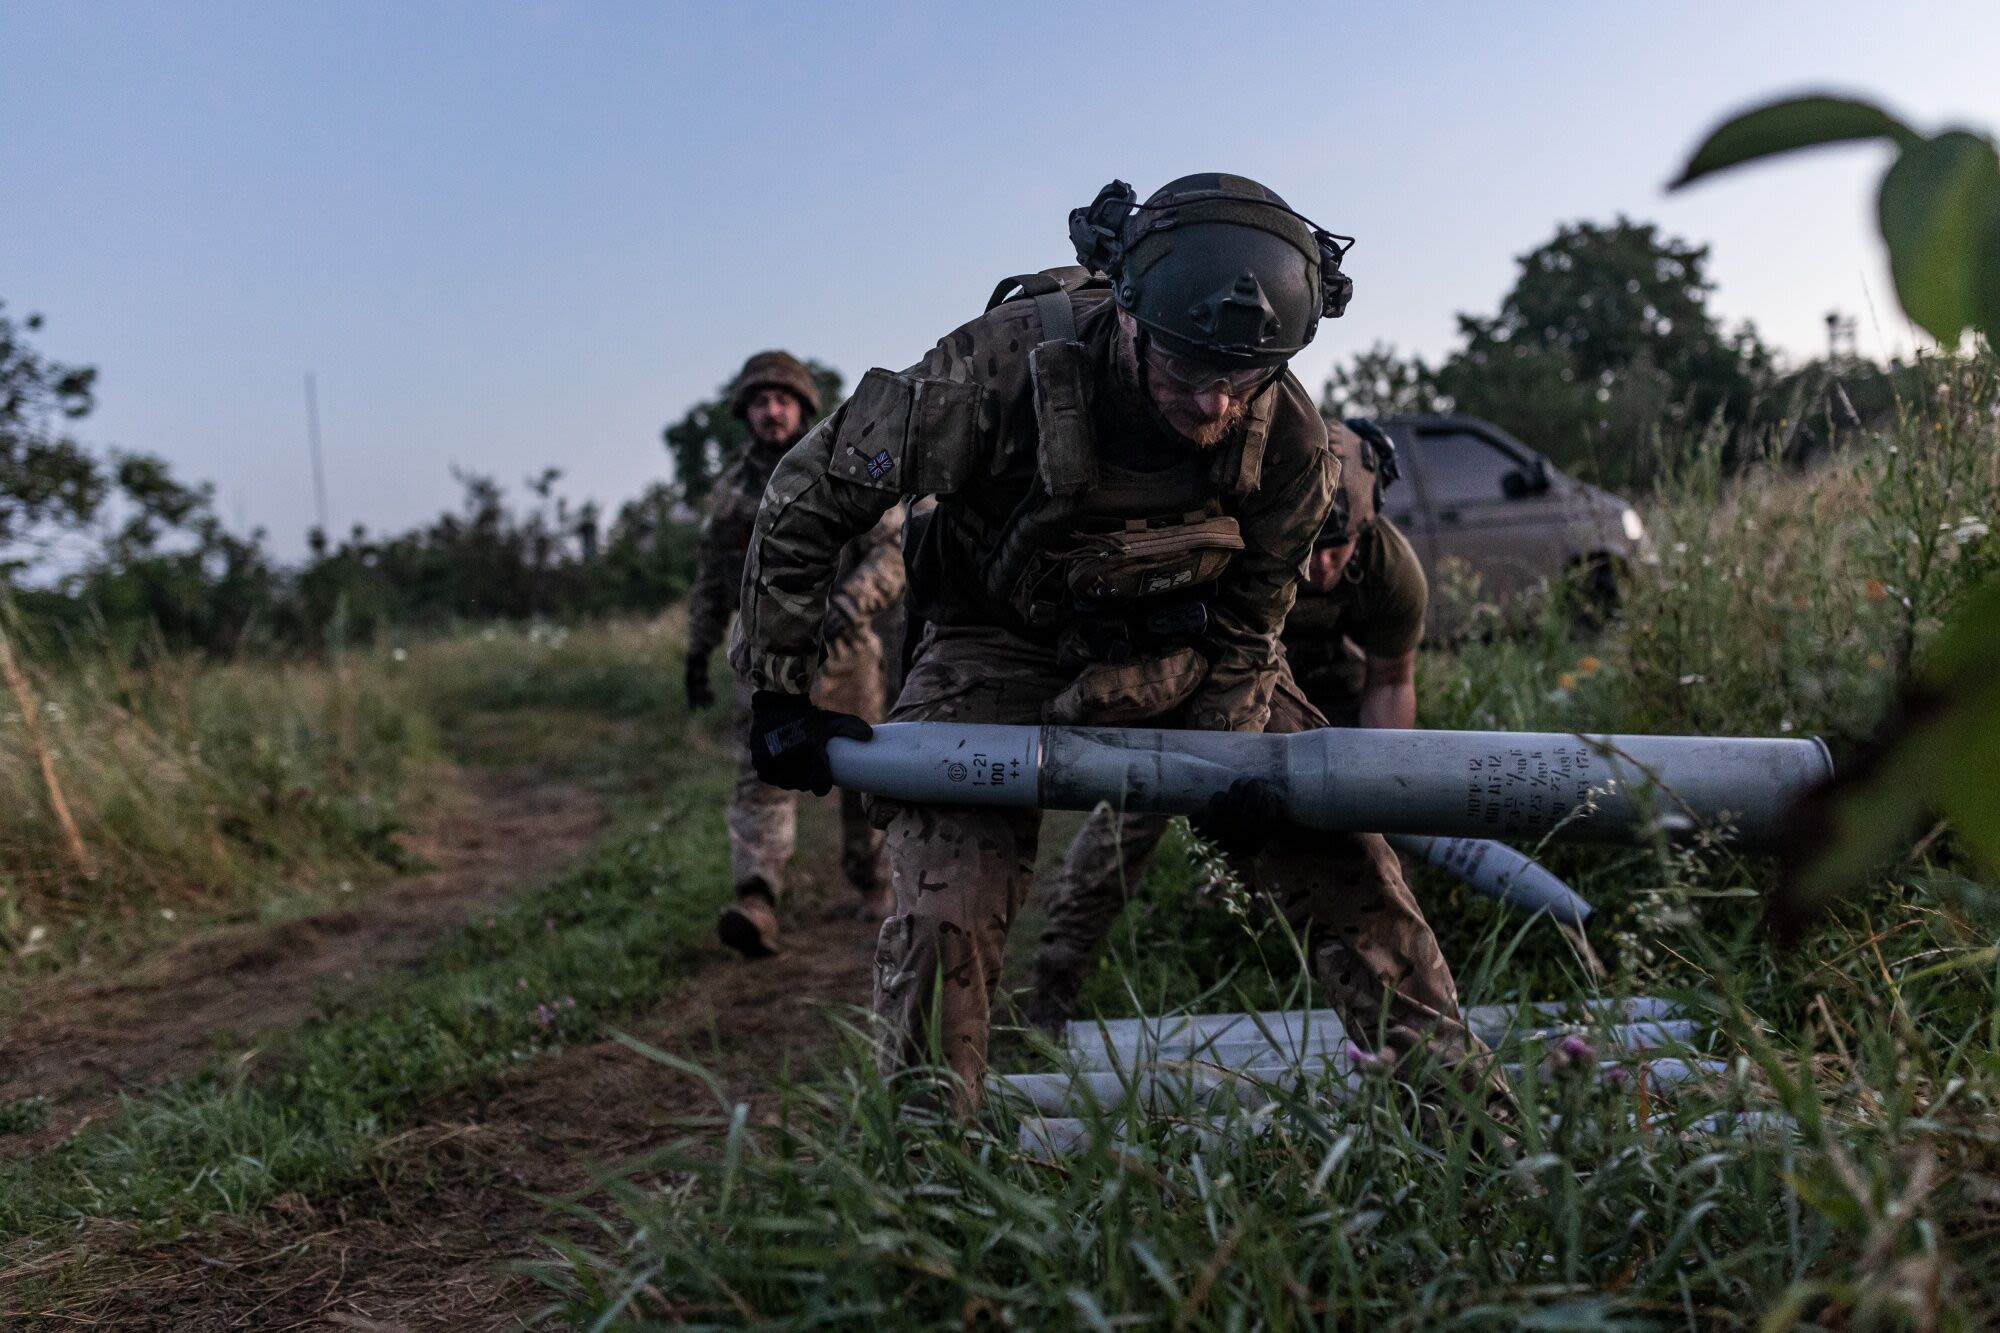 Slovakia Is Arming Ukraine Even Though It Doesn’t Want To